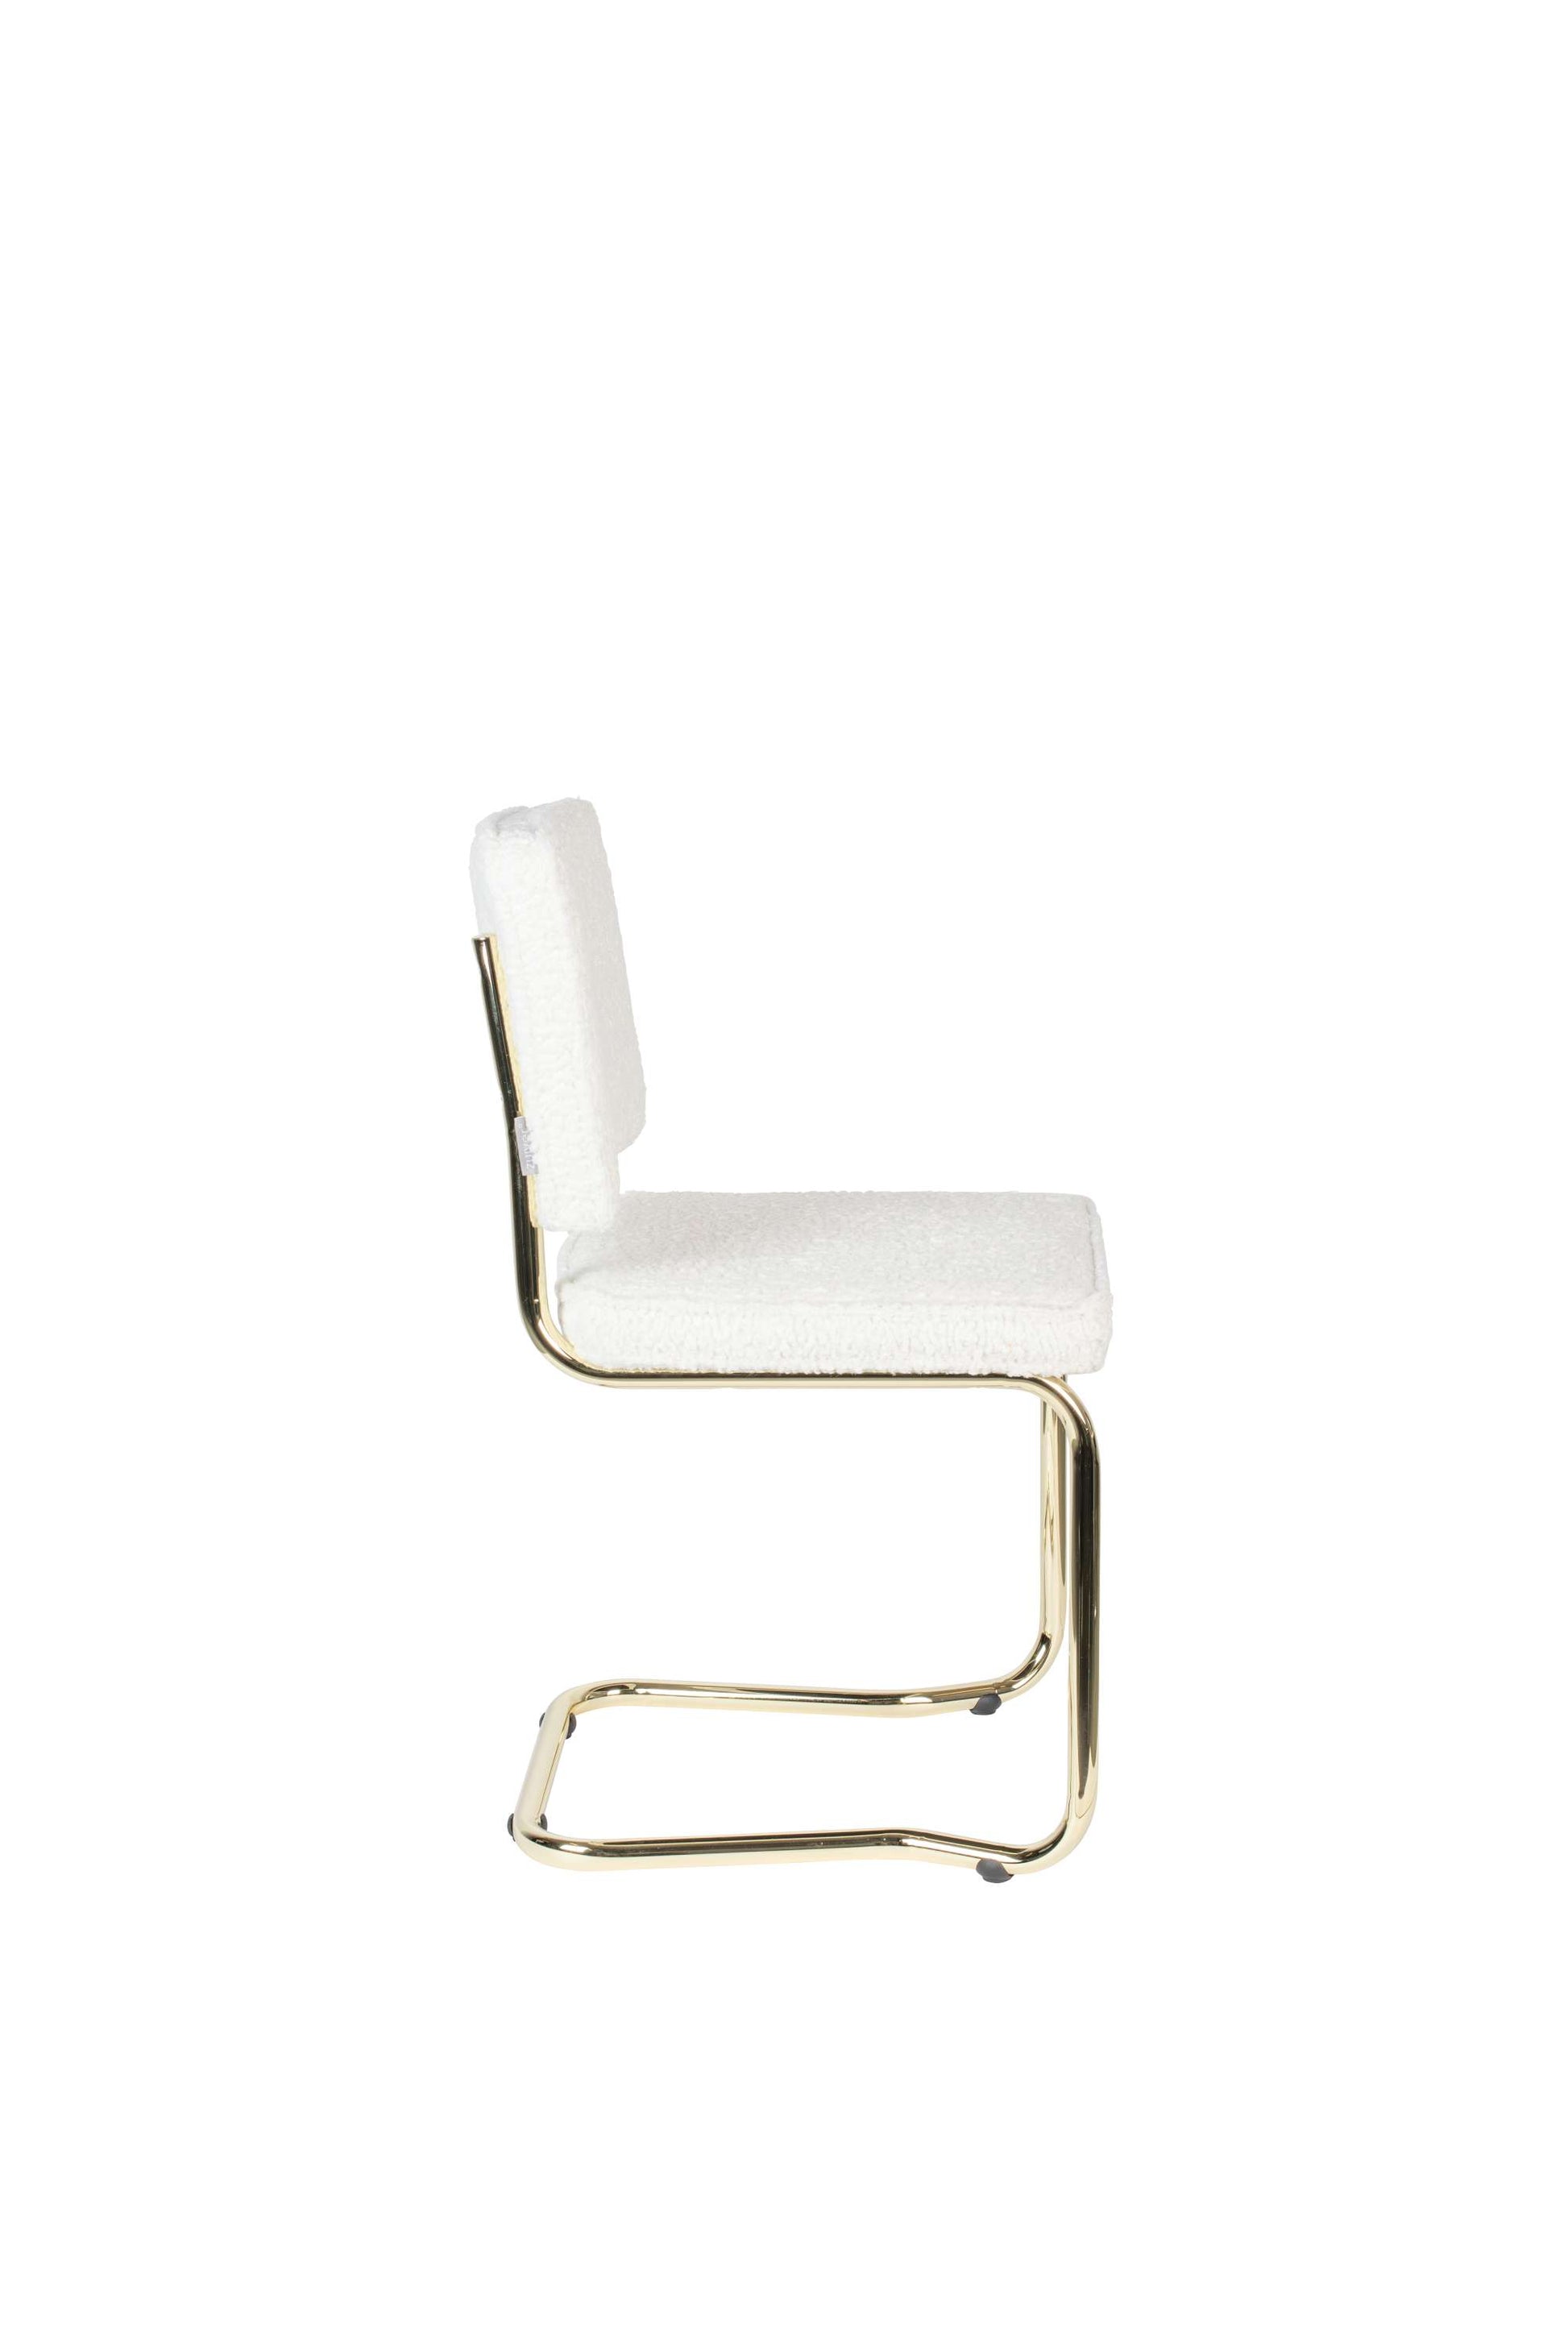 Zuiver | CHAIR TEDDY KINK WHITE Default Title